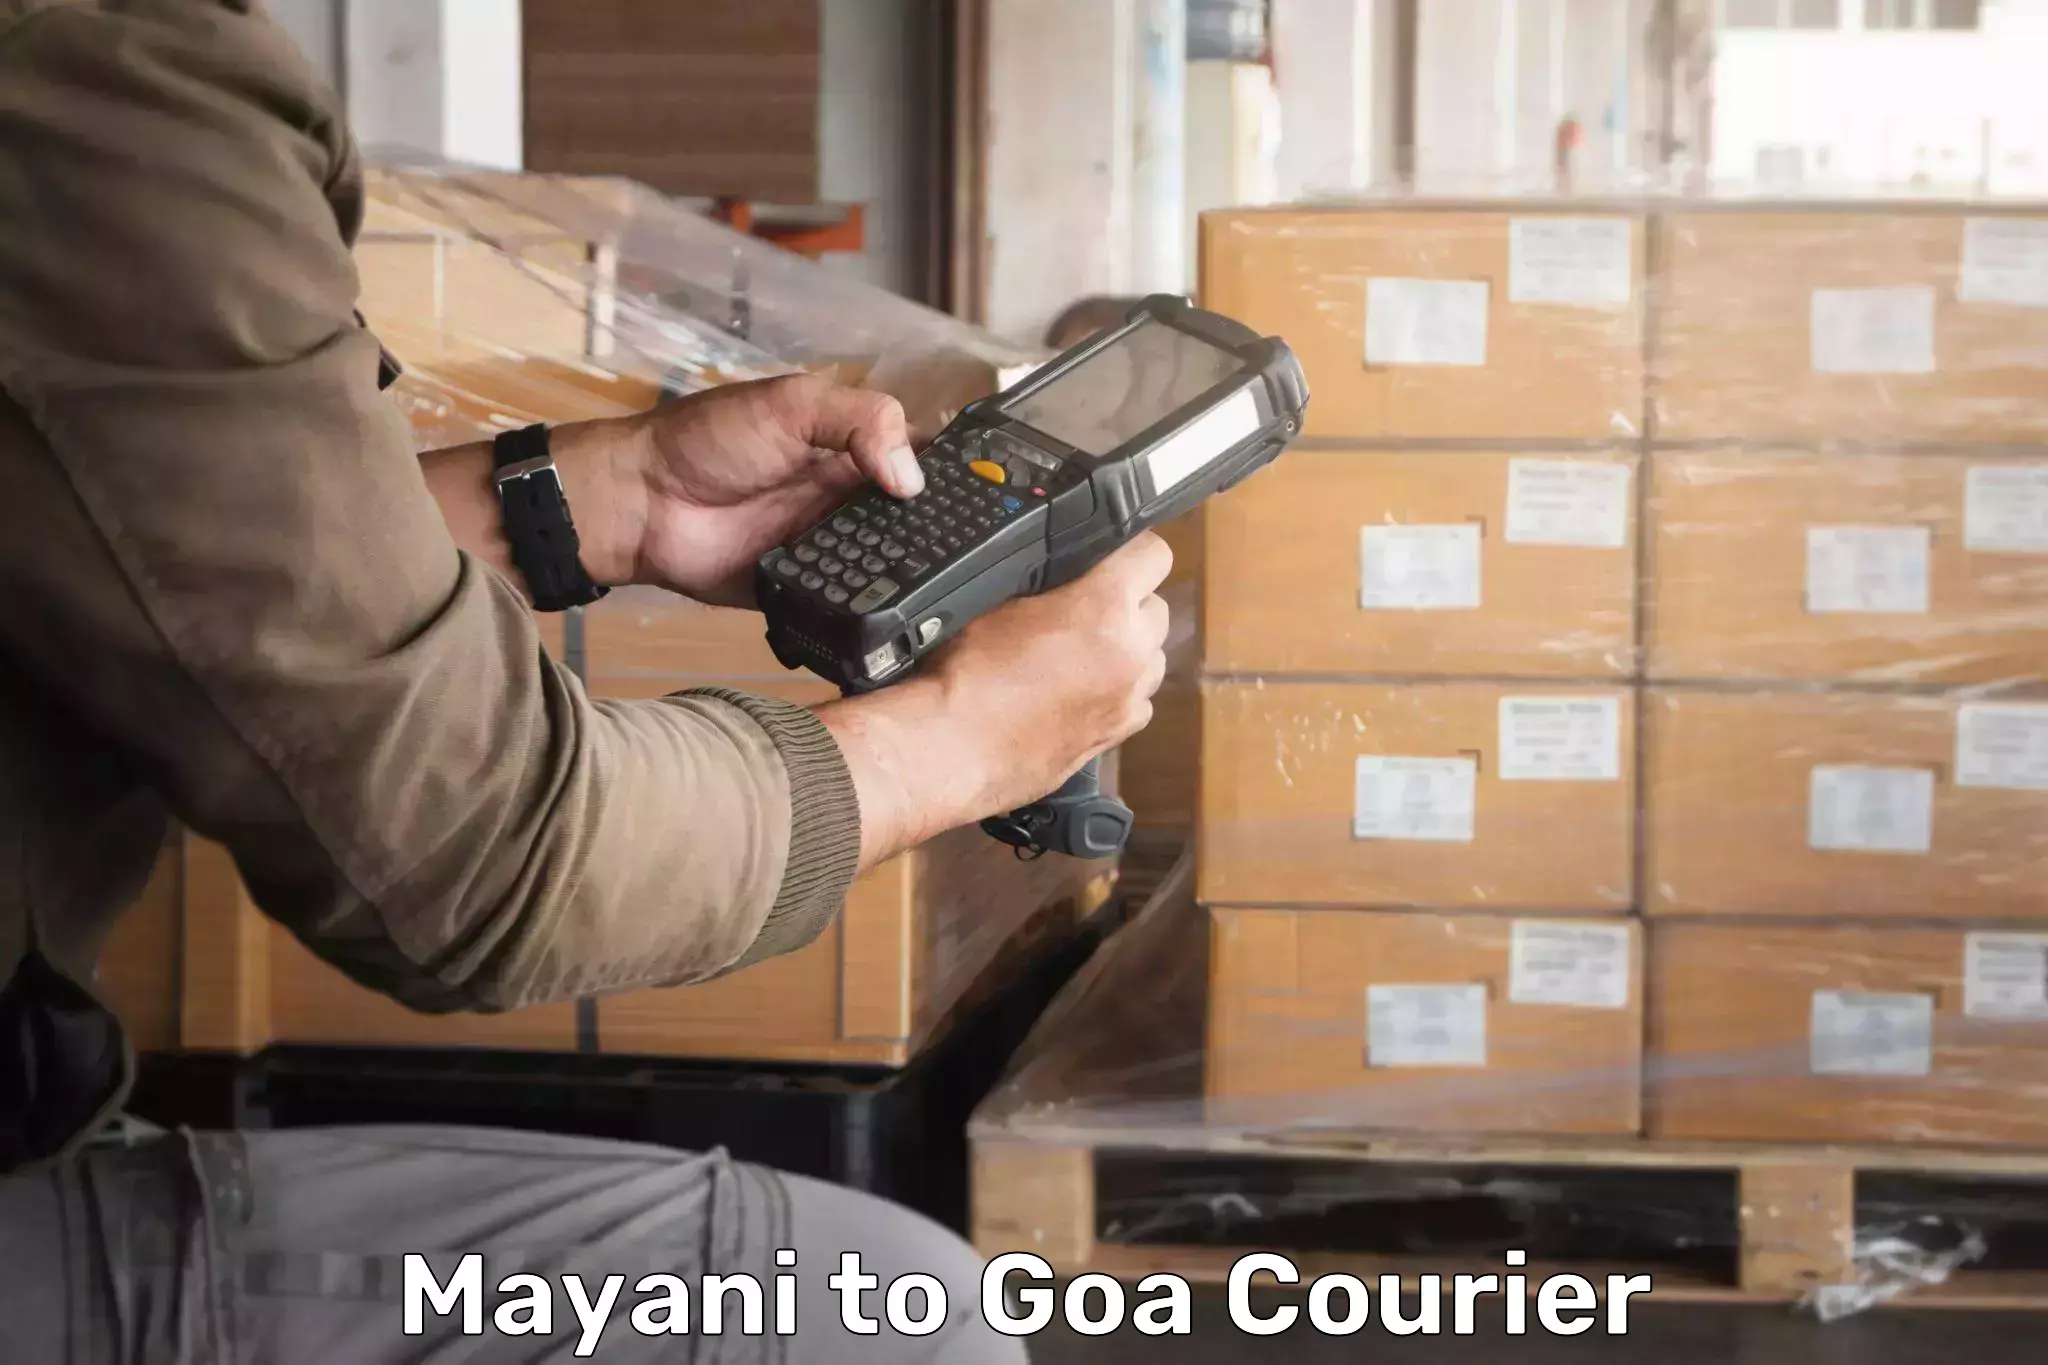 International courier networks Mayani to Goa